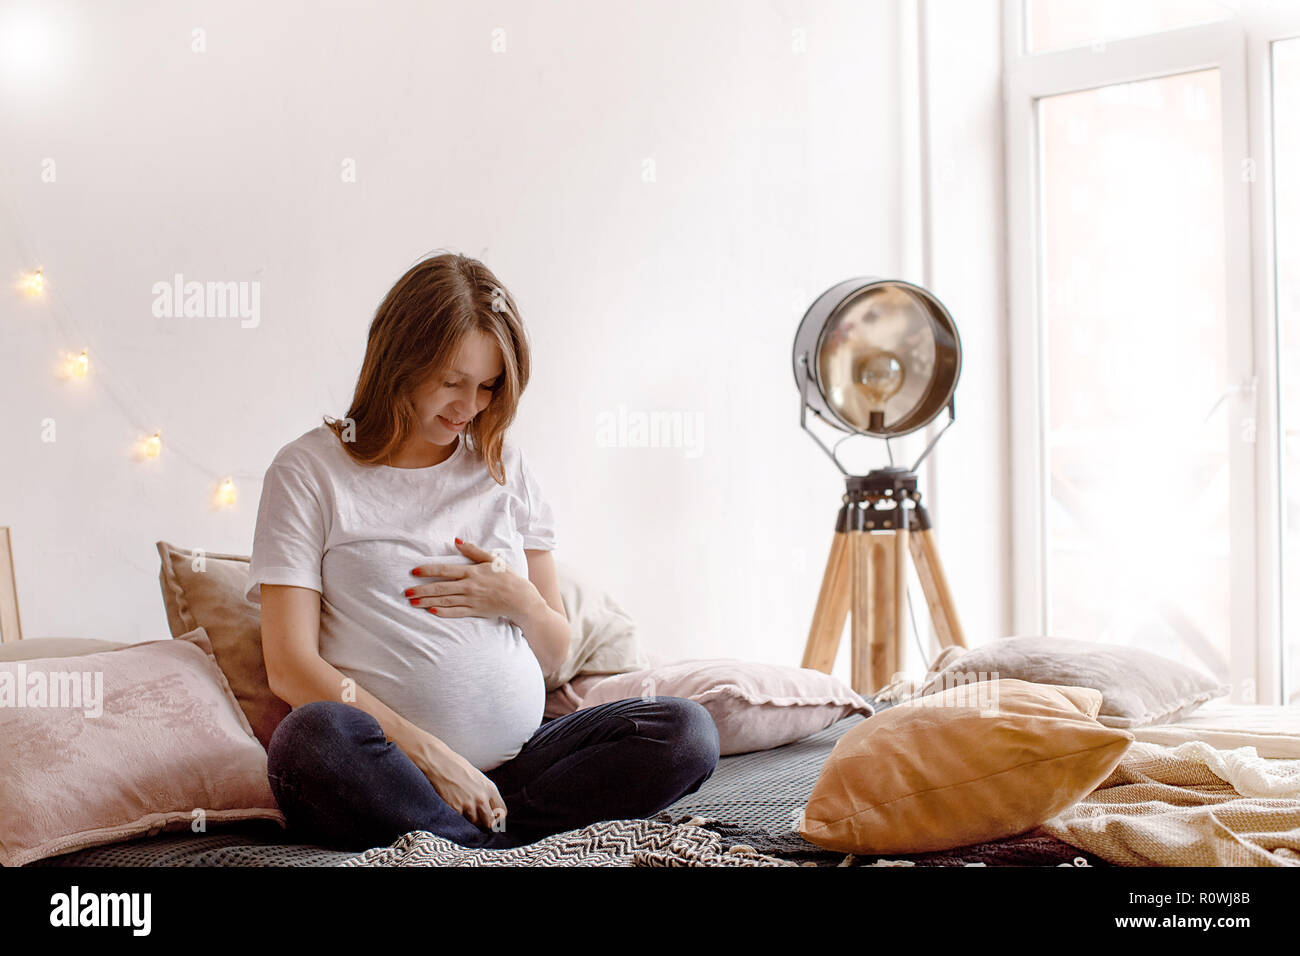 Pregnant woman sitting on bed Stock Photo